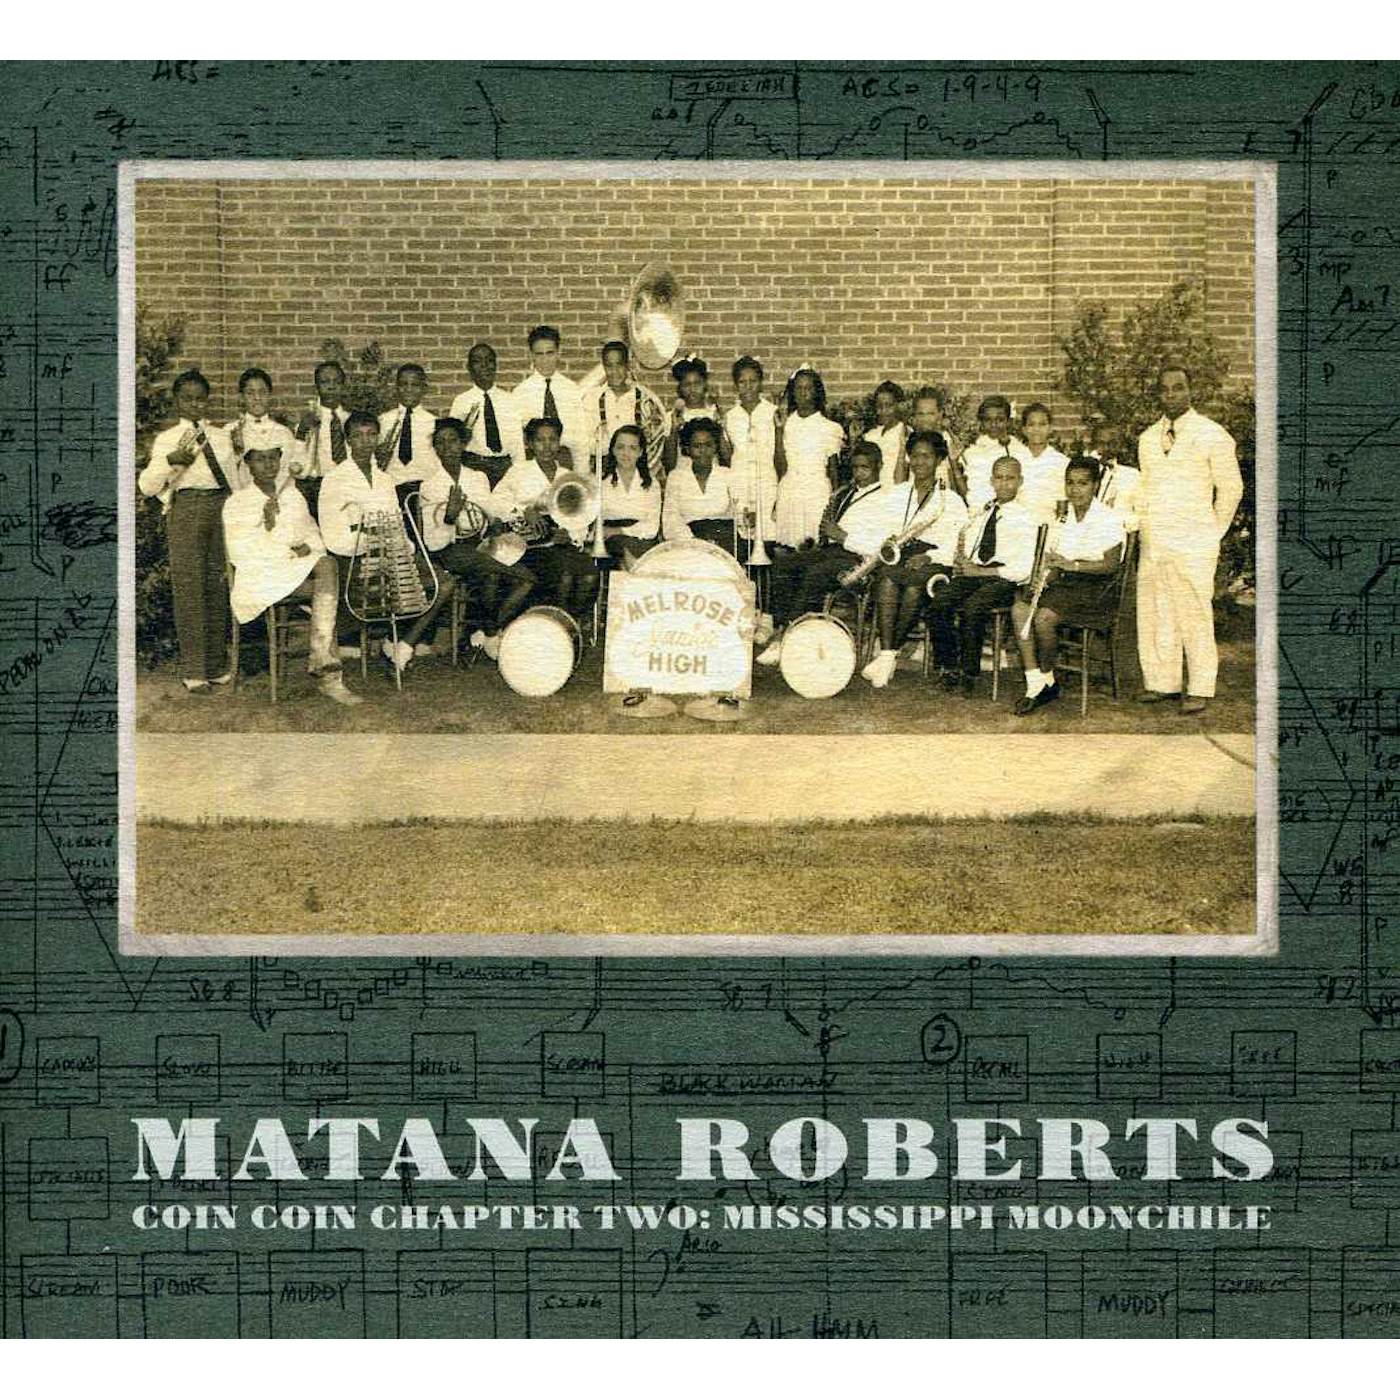 Matana Roberts COIN COIN CHAPTER TWO: MISSISSIPPI MOONCHILE CD